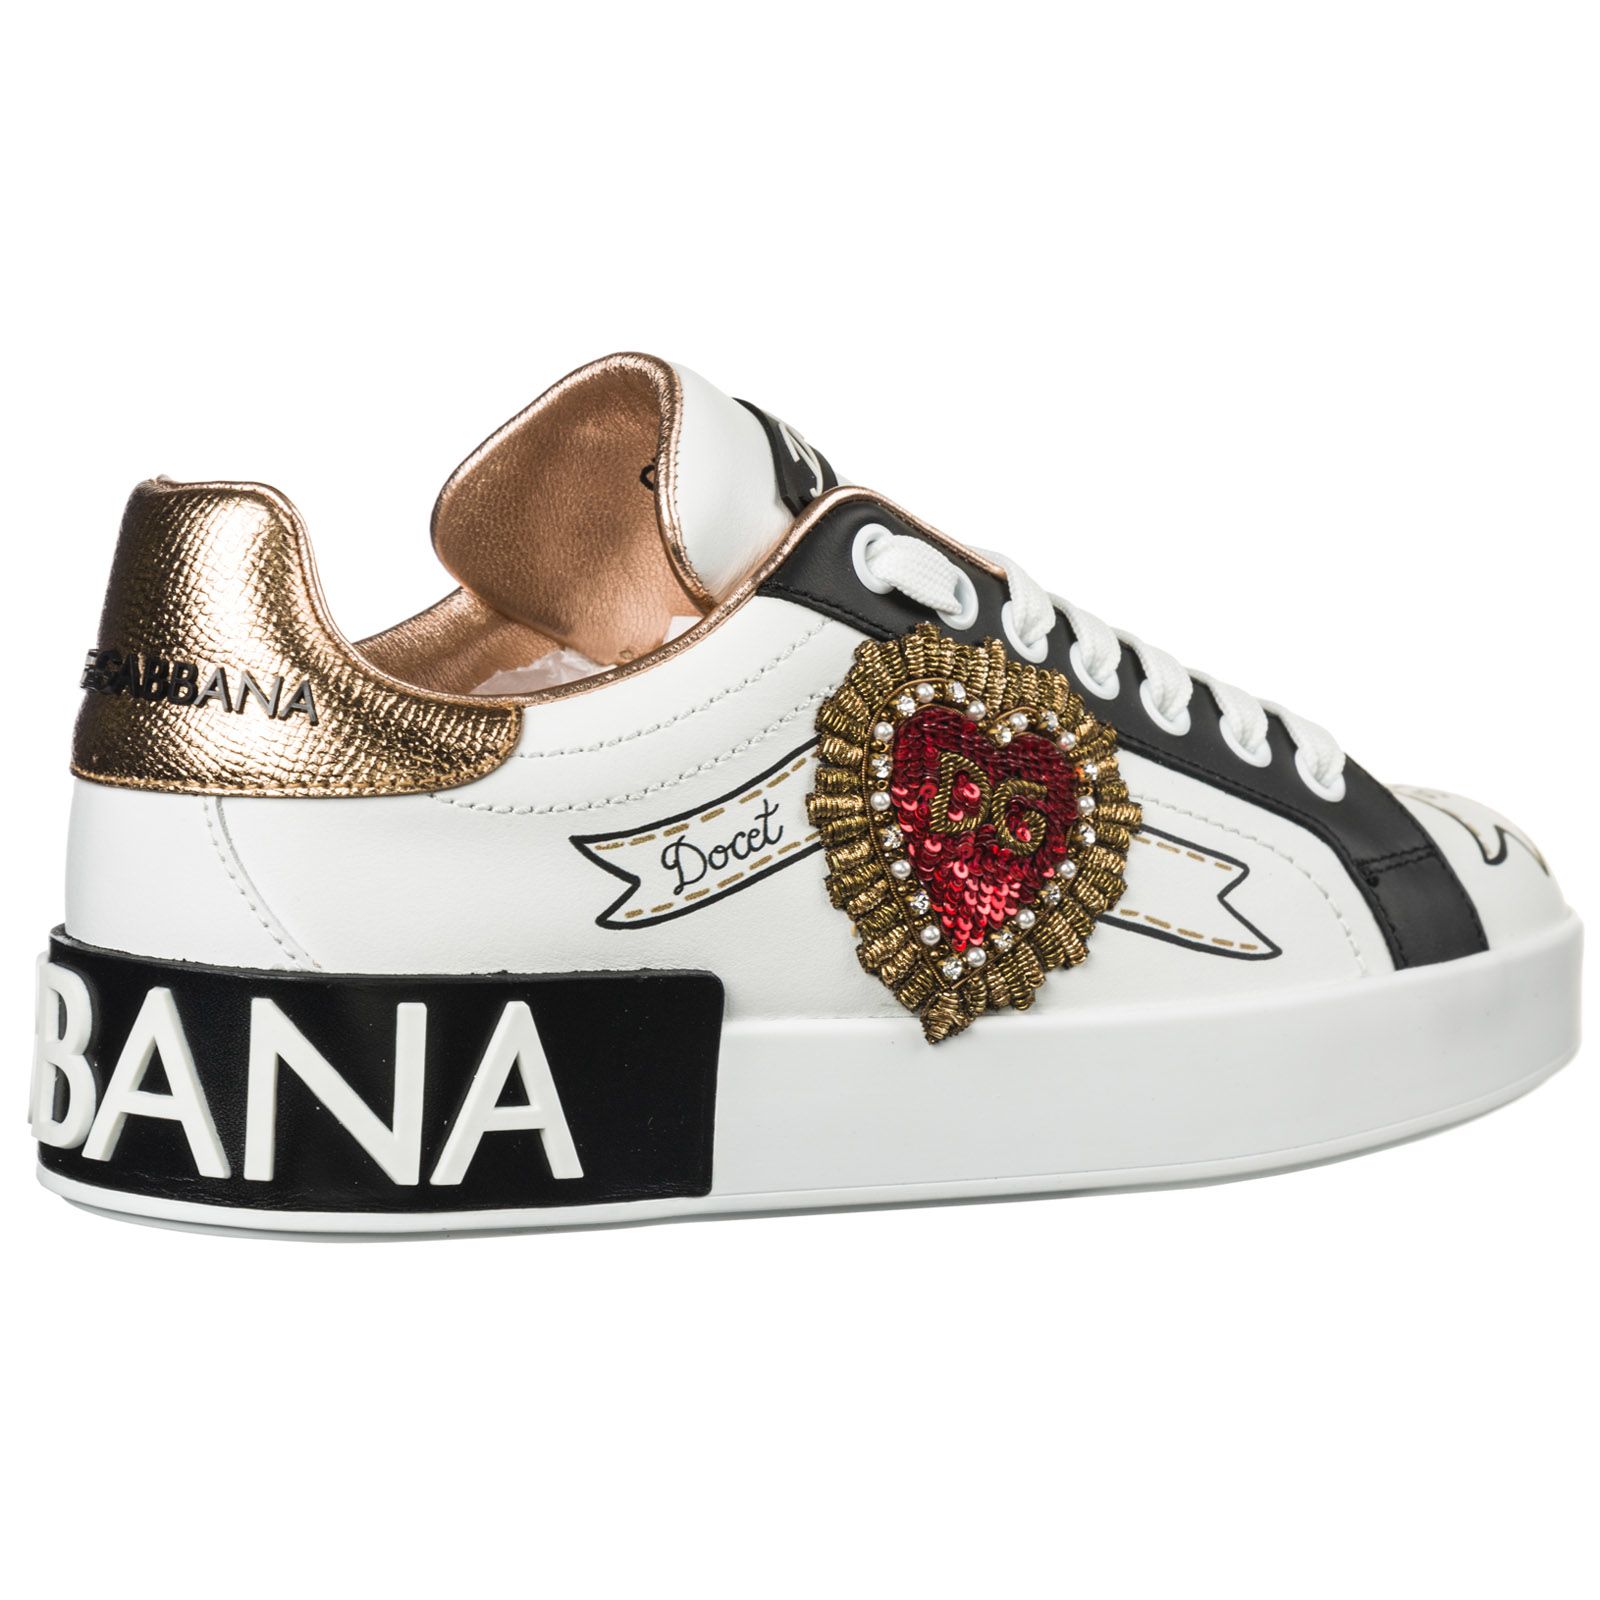 Dolce & Gabbana Dolce & Gabbana Shoes Leather Trainers Sneakers